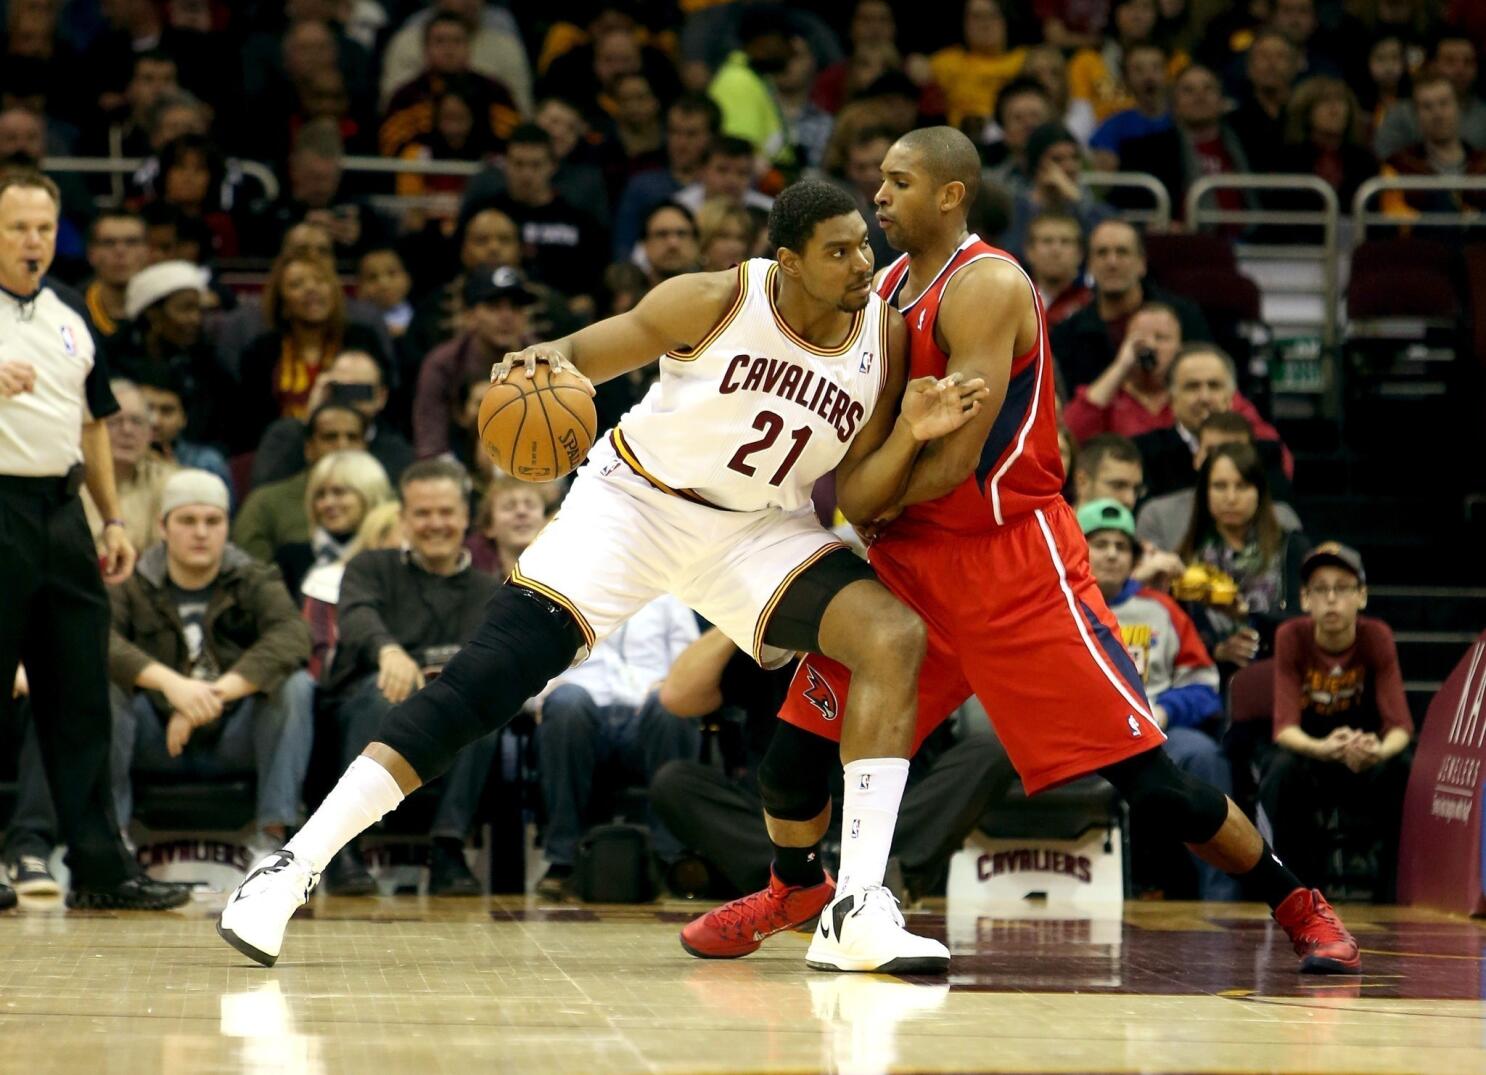 Andrew Bynum Out Indefinitely With Injuries to Both Knees